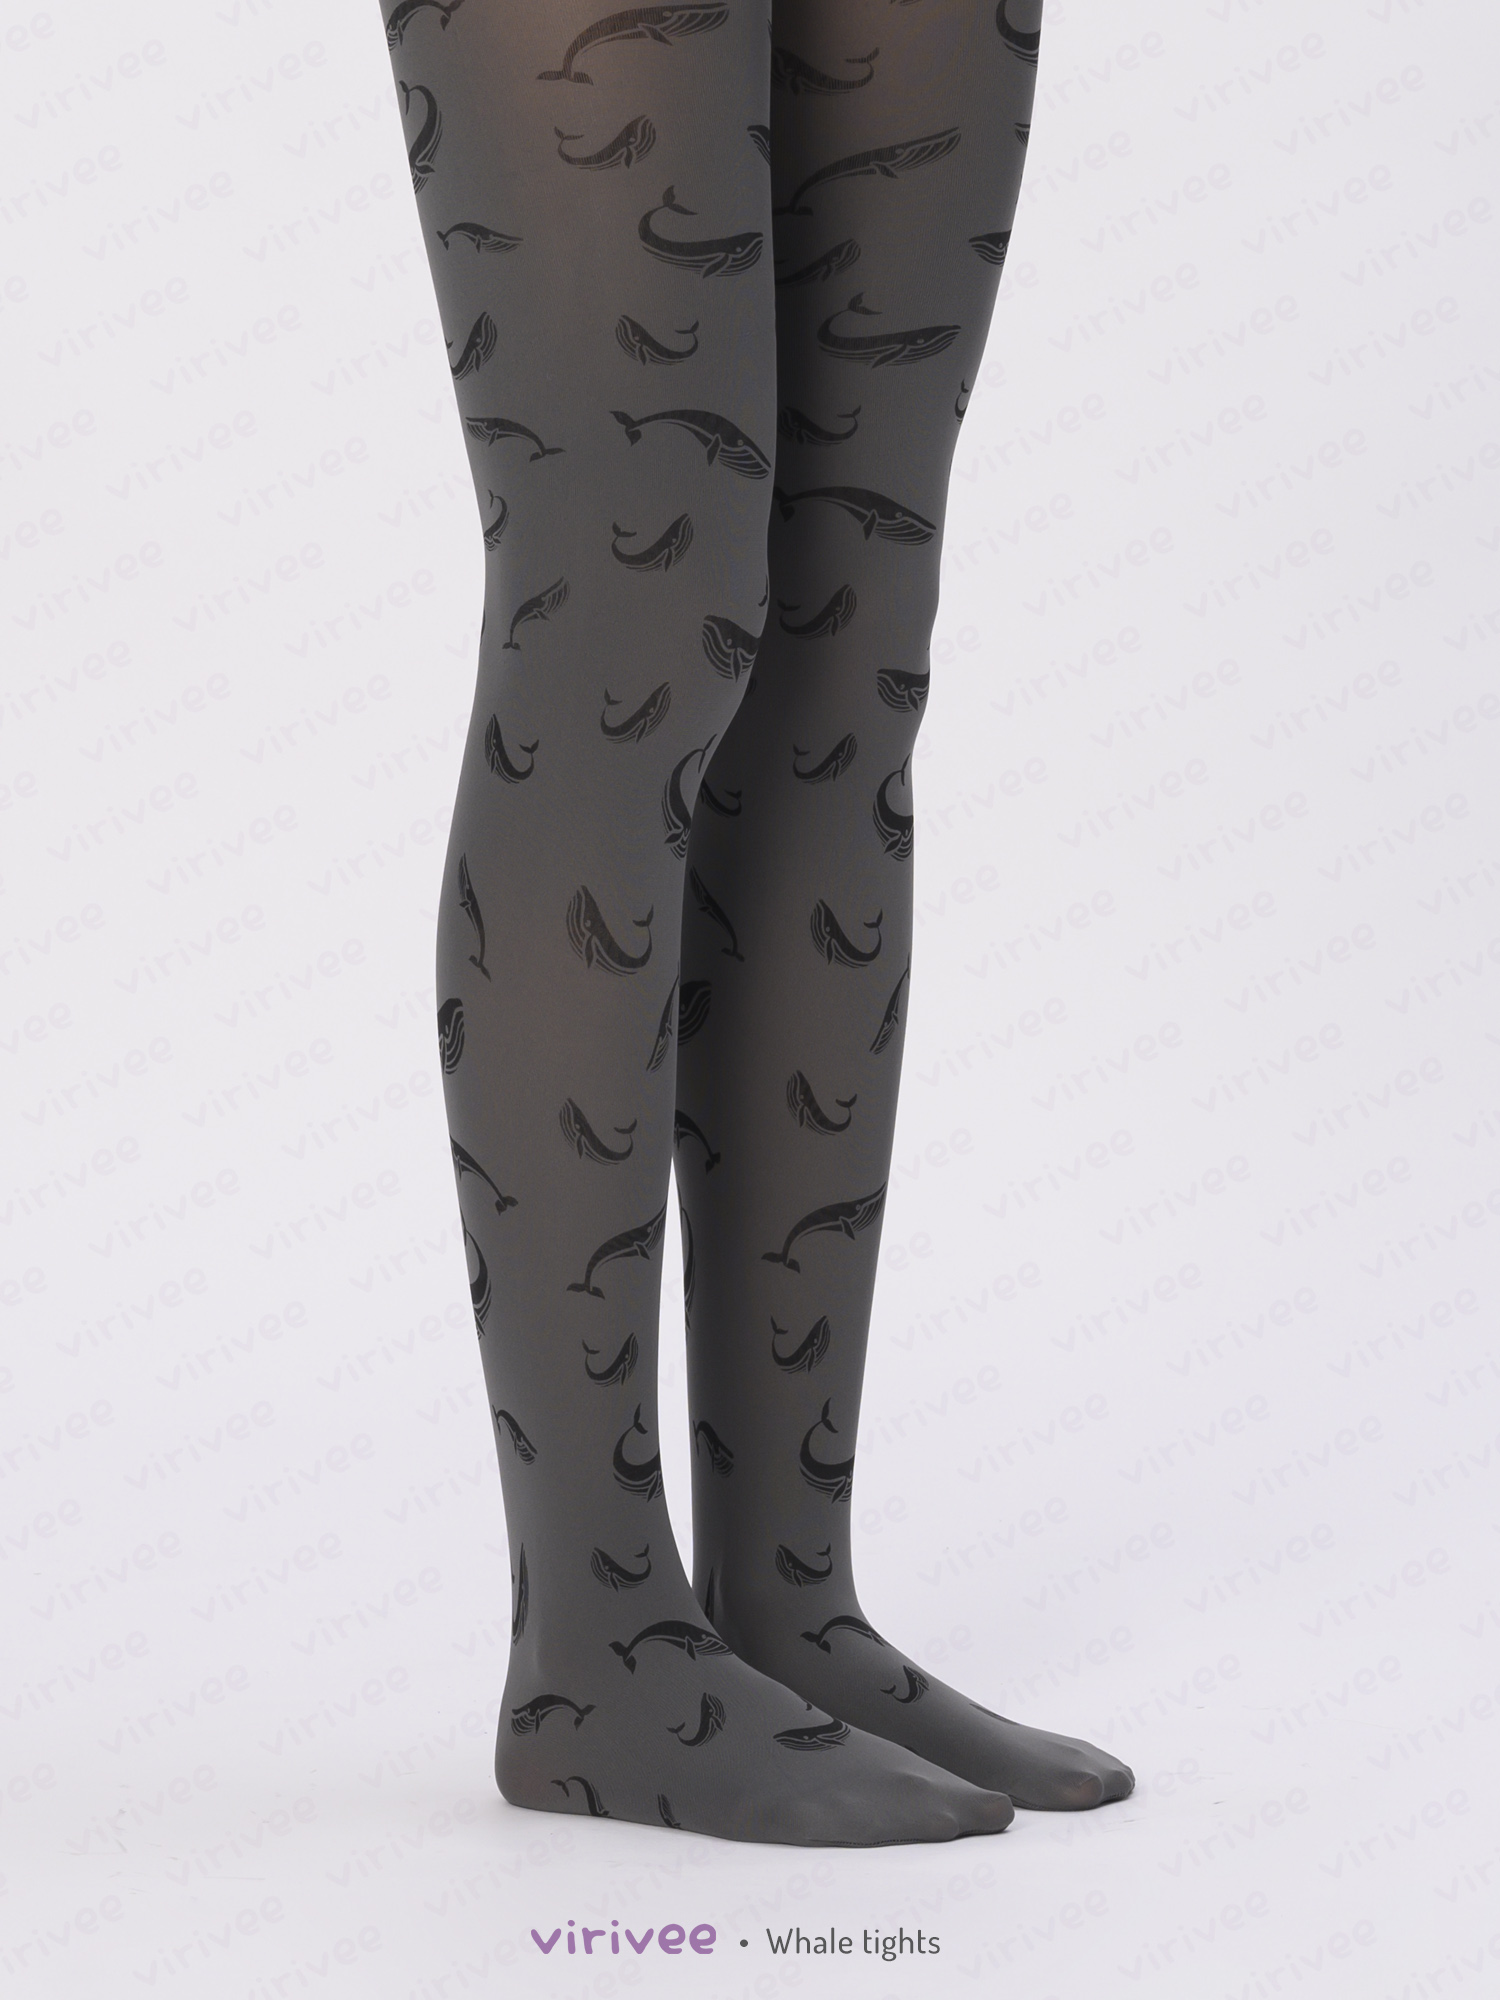 Whale tights by Virivee